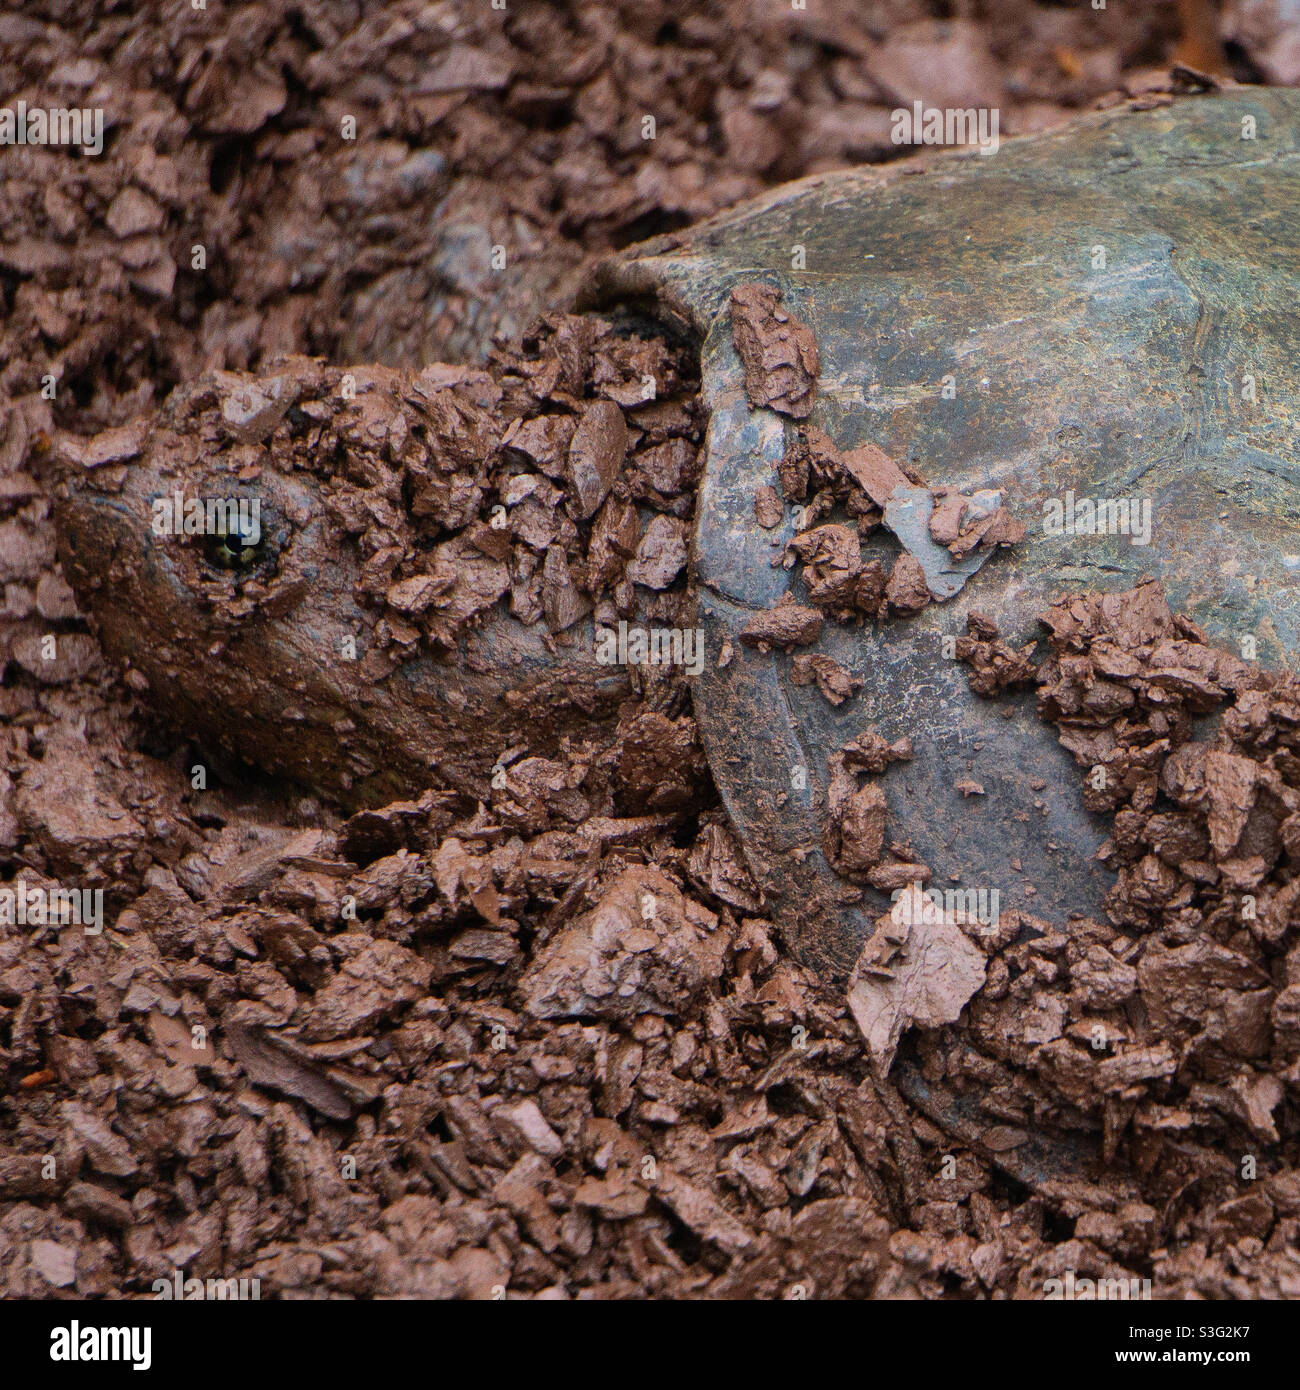 Mother common snapping turtle laying eggs in a shale pit Stock Photo